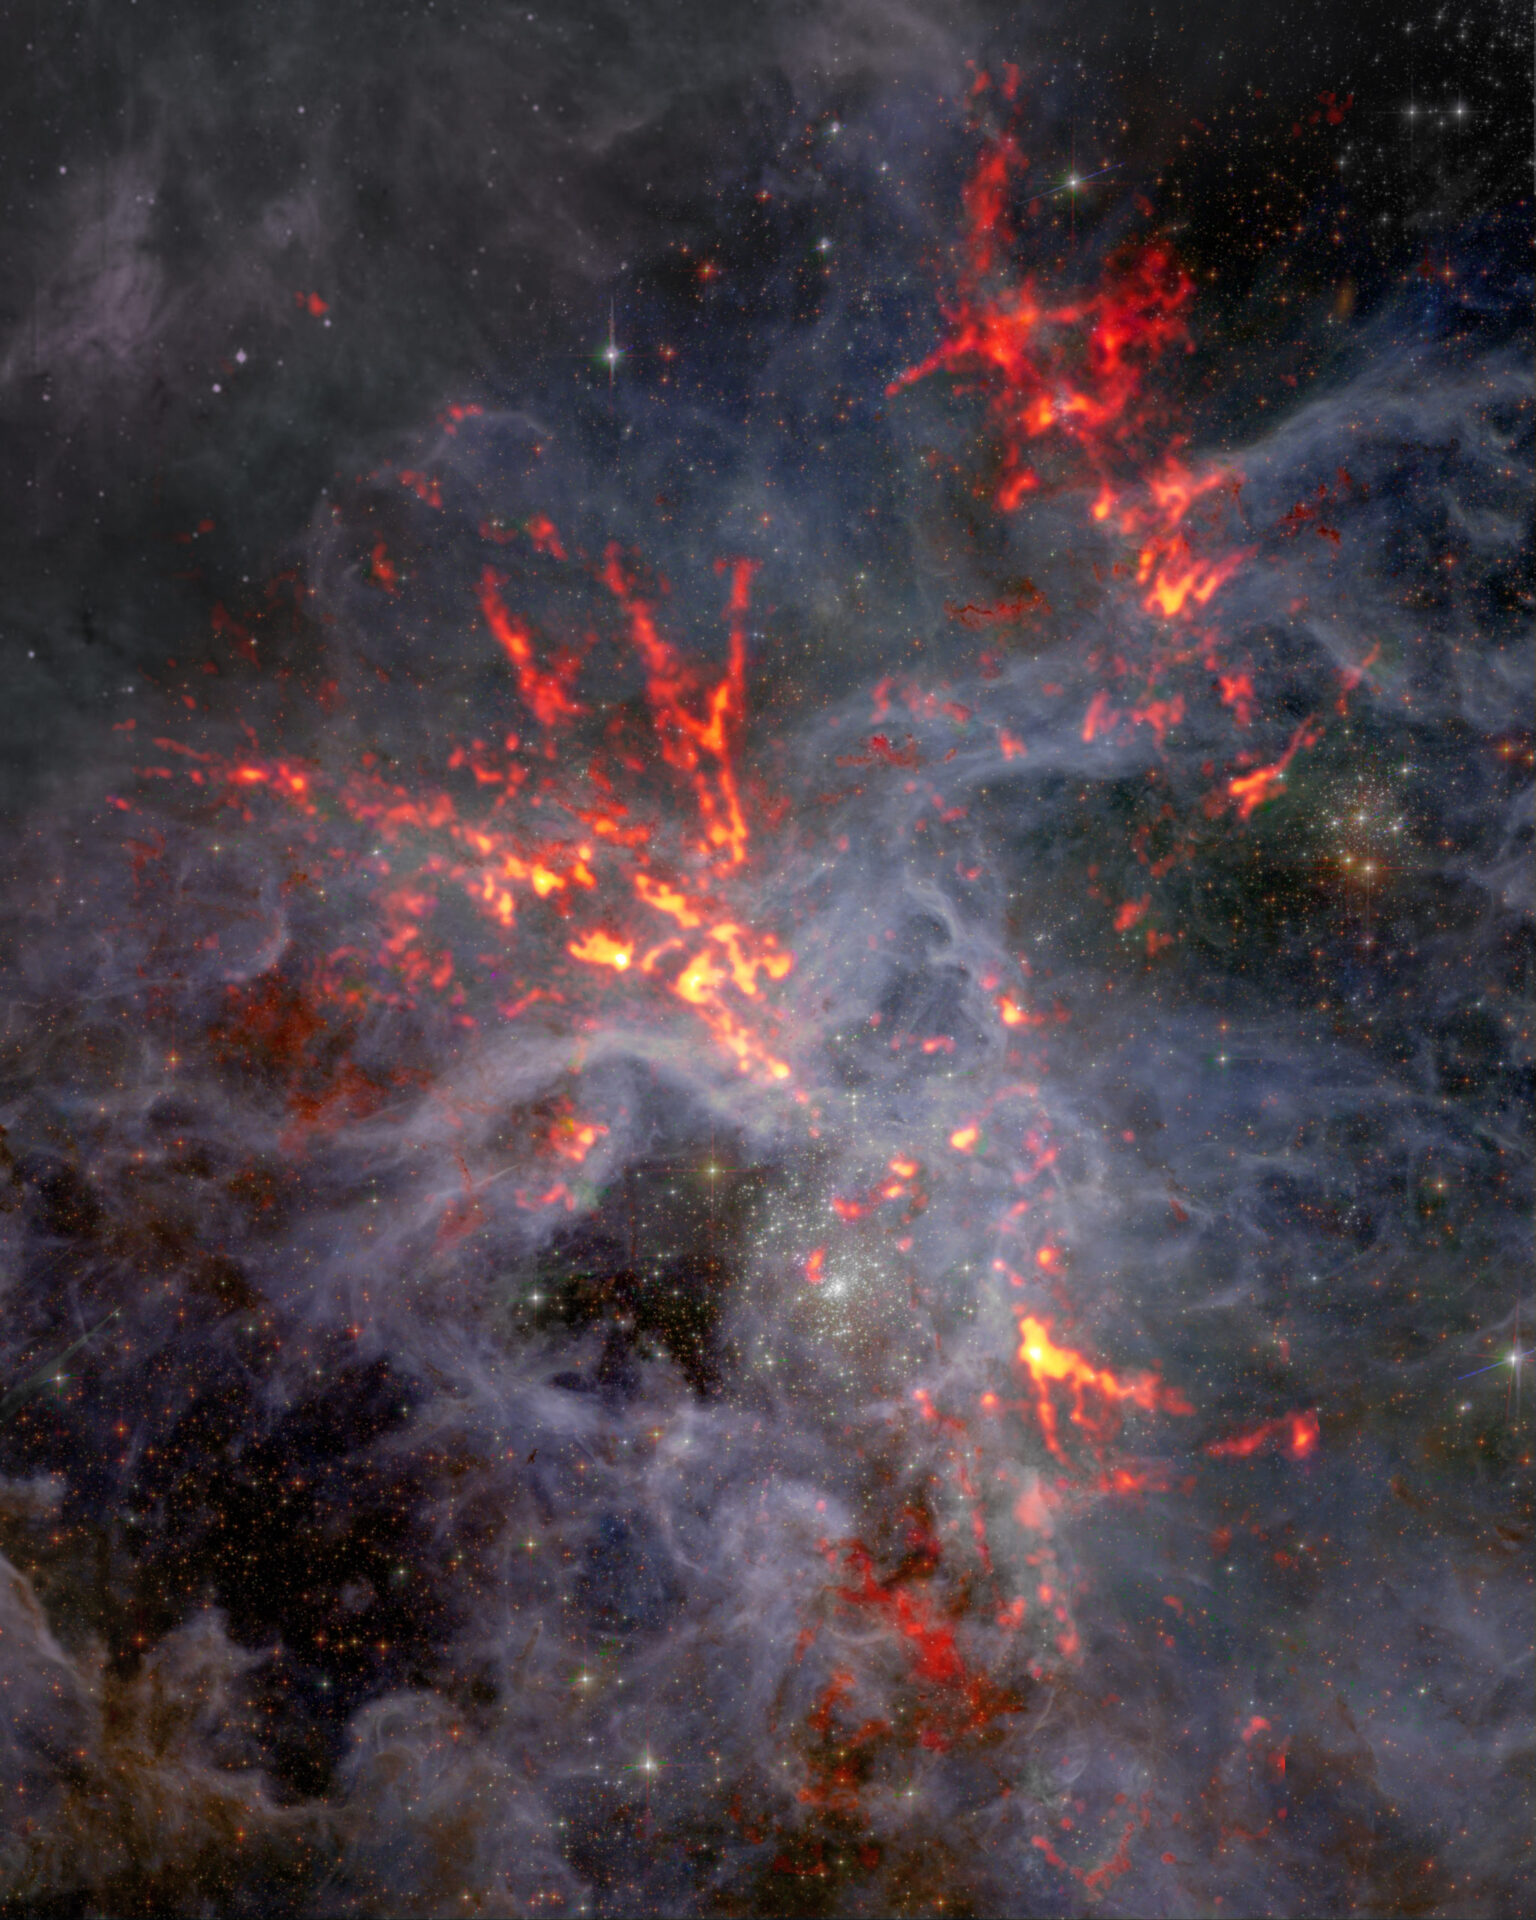 <p>30 Doradus is a large star-forming region located in the heart of the Tarantula Nebula. Shown here in composite, the red/orange millimeter-wavelength data from the Atacama Large Millimeter/submillimeter Array (ALMA) stands out like stringlike filaments against optical data from the Hubble Space Telescope (HST). Scientists studying 30 Dor discovered that despite intense stellar feedback— which is known to moderate or decrease the birth rate of stars— gravity continues to shape the region, giving rise to star formation. Credit: ALMA (ESO/NAOJ/NRAO), T. Wong (U. Illinois, Urbana-Champaign); S. Dagnello (NRAO/AUI/NSF)</p>
